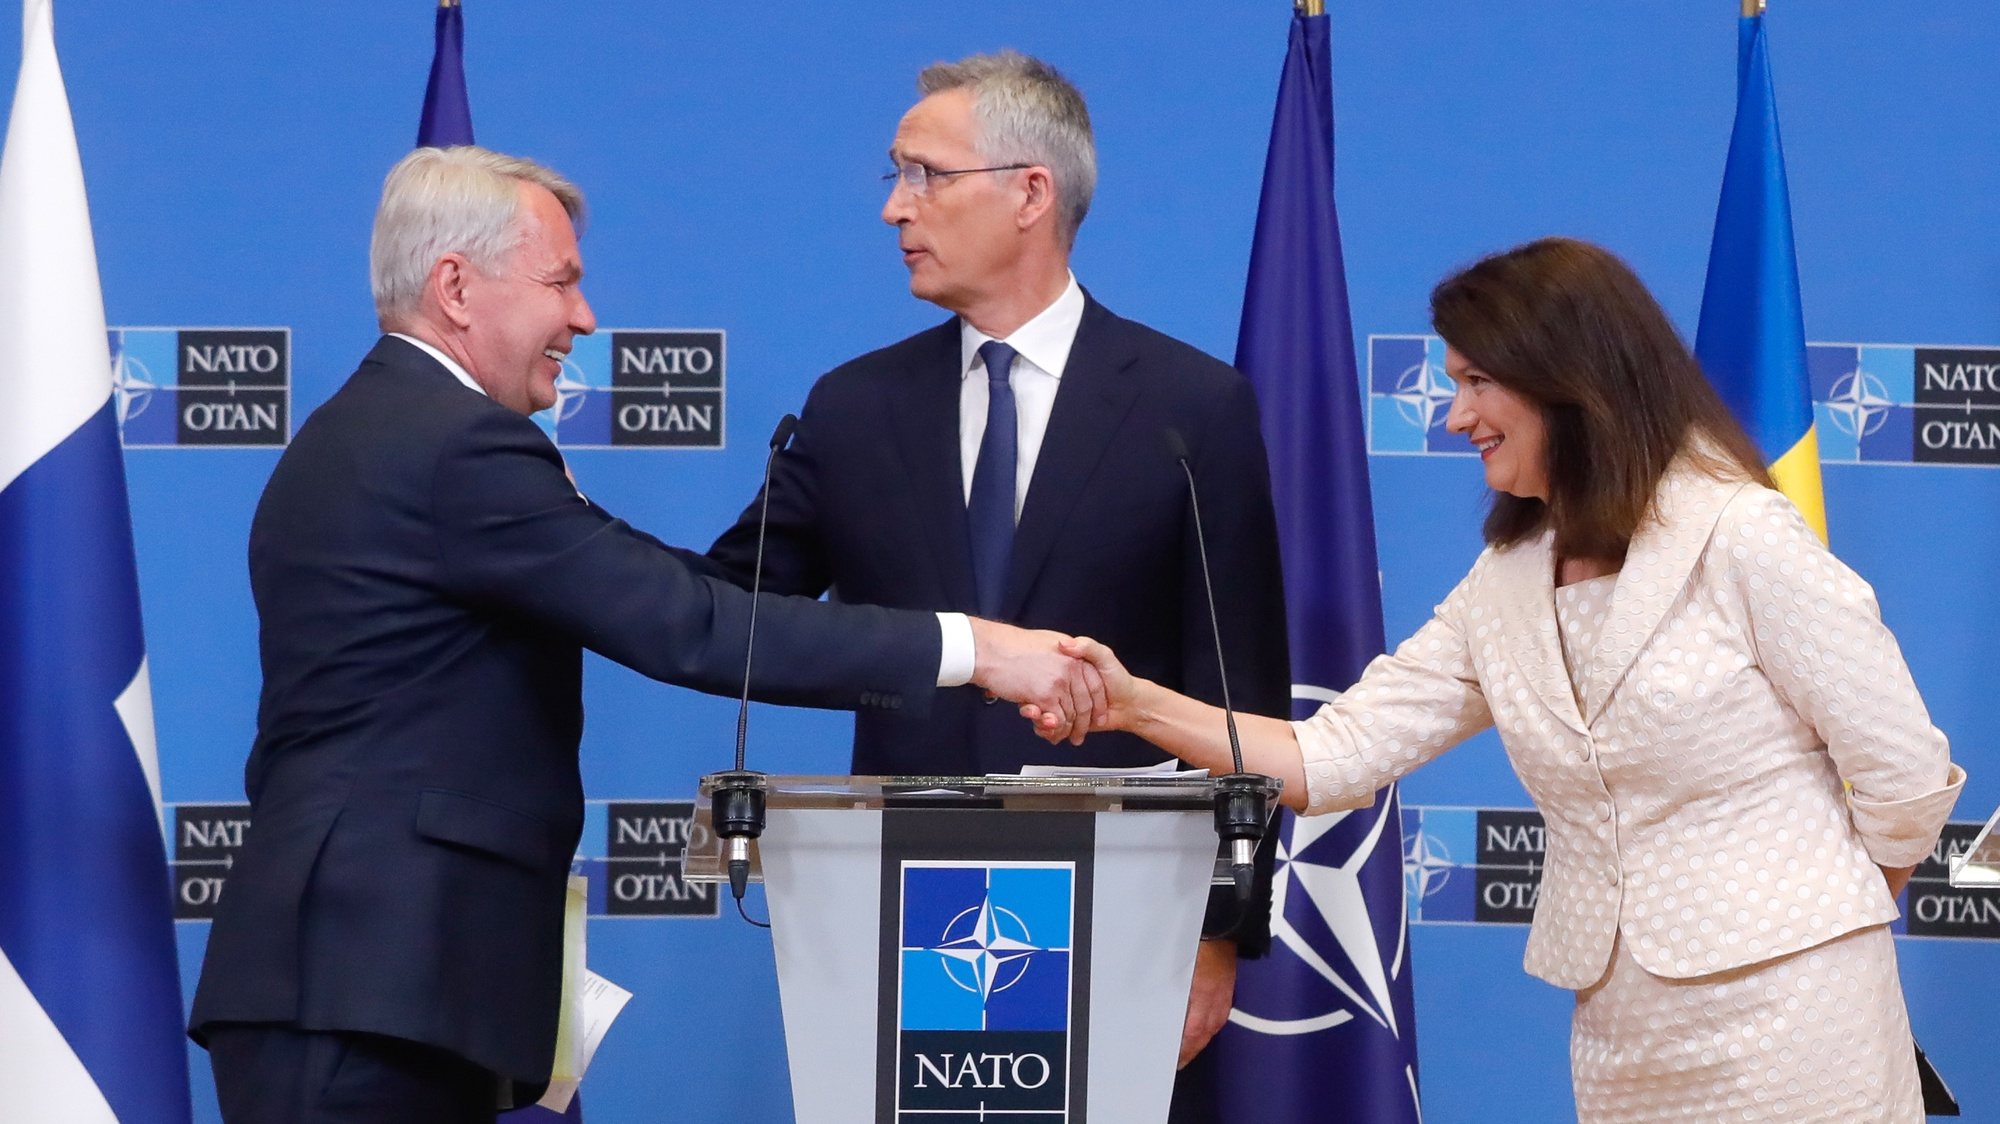 epa10052959 Finland&#039;s Minister of Foreign Affairs Pekka Haavisto (L) and Sweden&#039;s Minister of Foreign Affairs Ann Linde (R) shake hands next to NATO Secretary General Jens Stoltenberg (C) at the end of a joint press conference after the signature of the accession protocols to NATO of Finland and Sweden, at NATO headquarters in Brussels, Belgium, 05 July 2022.  EPA/STEPHANIE LECOCQ